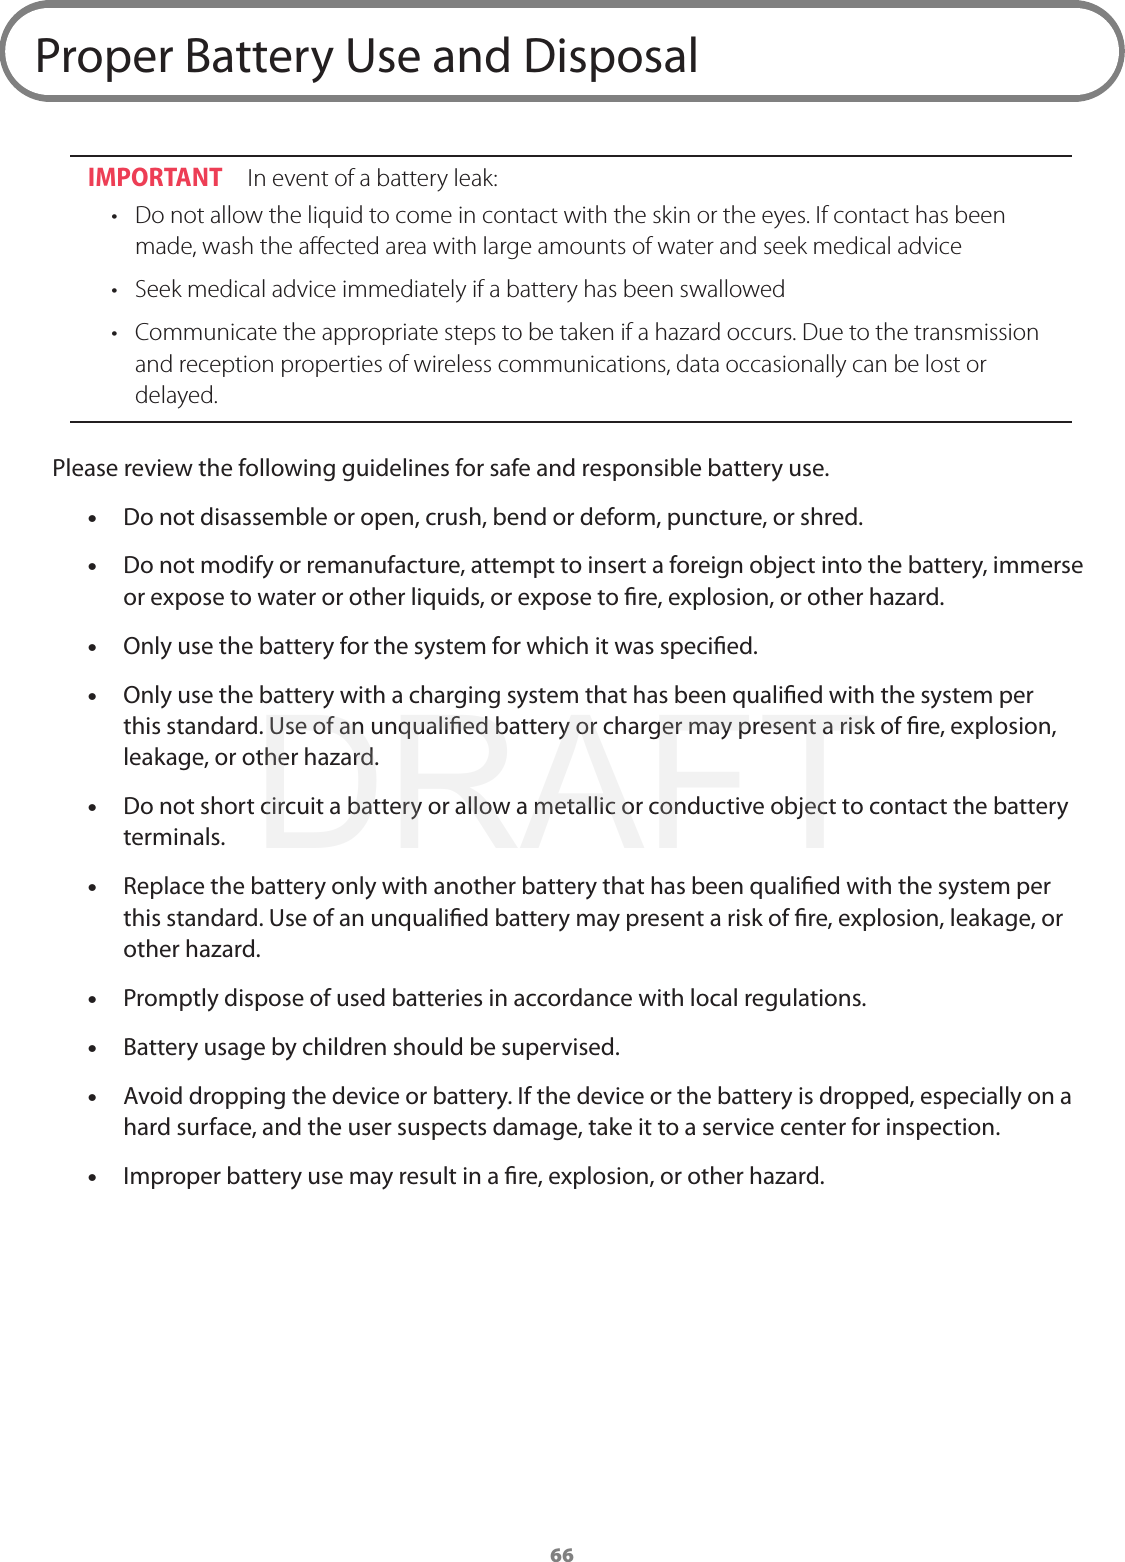 66Proper Battery Use and DisposalIMPORTANT  In event of a battery leak:•  Do not allow the liquid to come in contact with the skin or the eyes. If contact has been made, wash the aﬀected area with large amounts of water and seek medical advice•  Seek medical advice immediately if a battery has been swallowed•  Communicate the appropriate steps to be taken if a hazard occurs. Due to the transmission and reception properties of wireless communications, data occasionally can be lost or delayed. Please review the following guidelines for safe and responsible battery use. •Do not disassemble or open, crush, bend or deform, puncture, or shred. •Do not modify or remanufacture, attempt to insert a foreign object into the battery, immerse or expose to water or other liquids, or expose to re, explosion, or other hazard. •Only use the battery for the system for which it was specied. •Only use the battery with a charging system that has been qualied with the system per this standard. Use of an unqualied battery or charger may present a risk of re, explosion, leakage, or other hazard. •Do not short circuit a battery or allow a metallic or conductive object to contact the battery terminals. •Replace the battery only with another battery that has been qualied with the system per this standard. Use of an unqualied battery may present a risk of re, explosion, leakage, or other hazard. •Promptly dispose of used batteries in accordance with local regulations. •Battery usage by children should be supervised. •Avoid dropping the device or battery. If the device or the battery is dropped, especially on a hard surface, and the user suspects damage, take it to a service center for inspection. •Improper battery use may result in a re, explosion, or other hazard.DRAFT